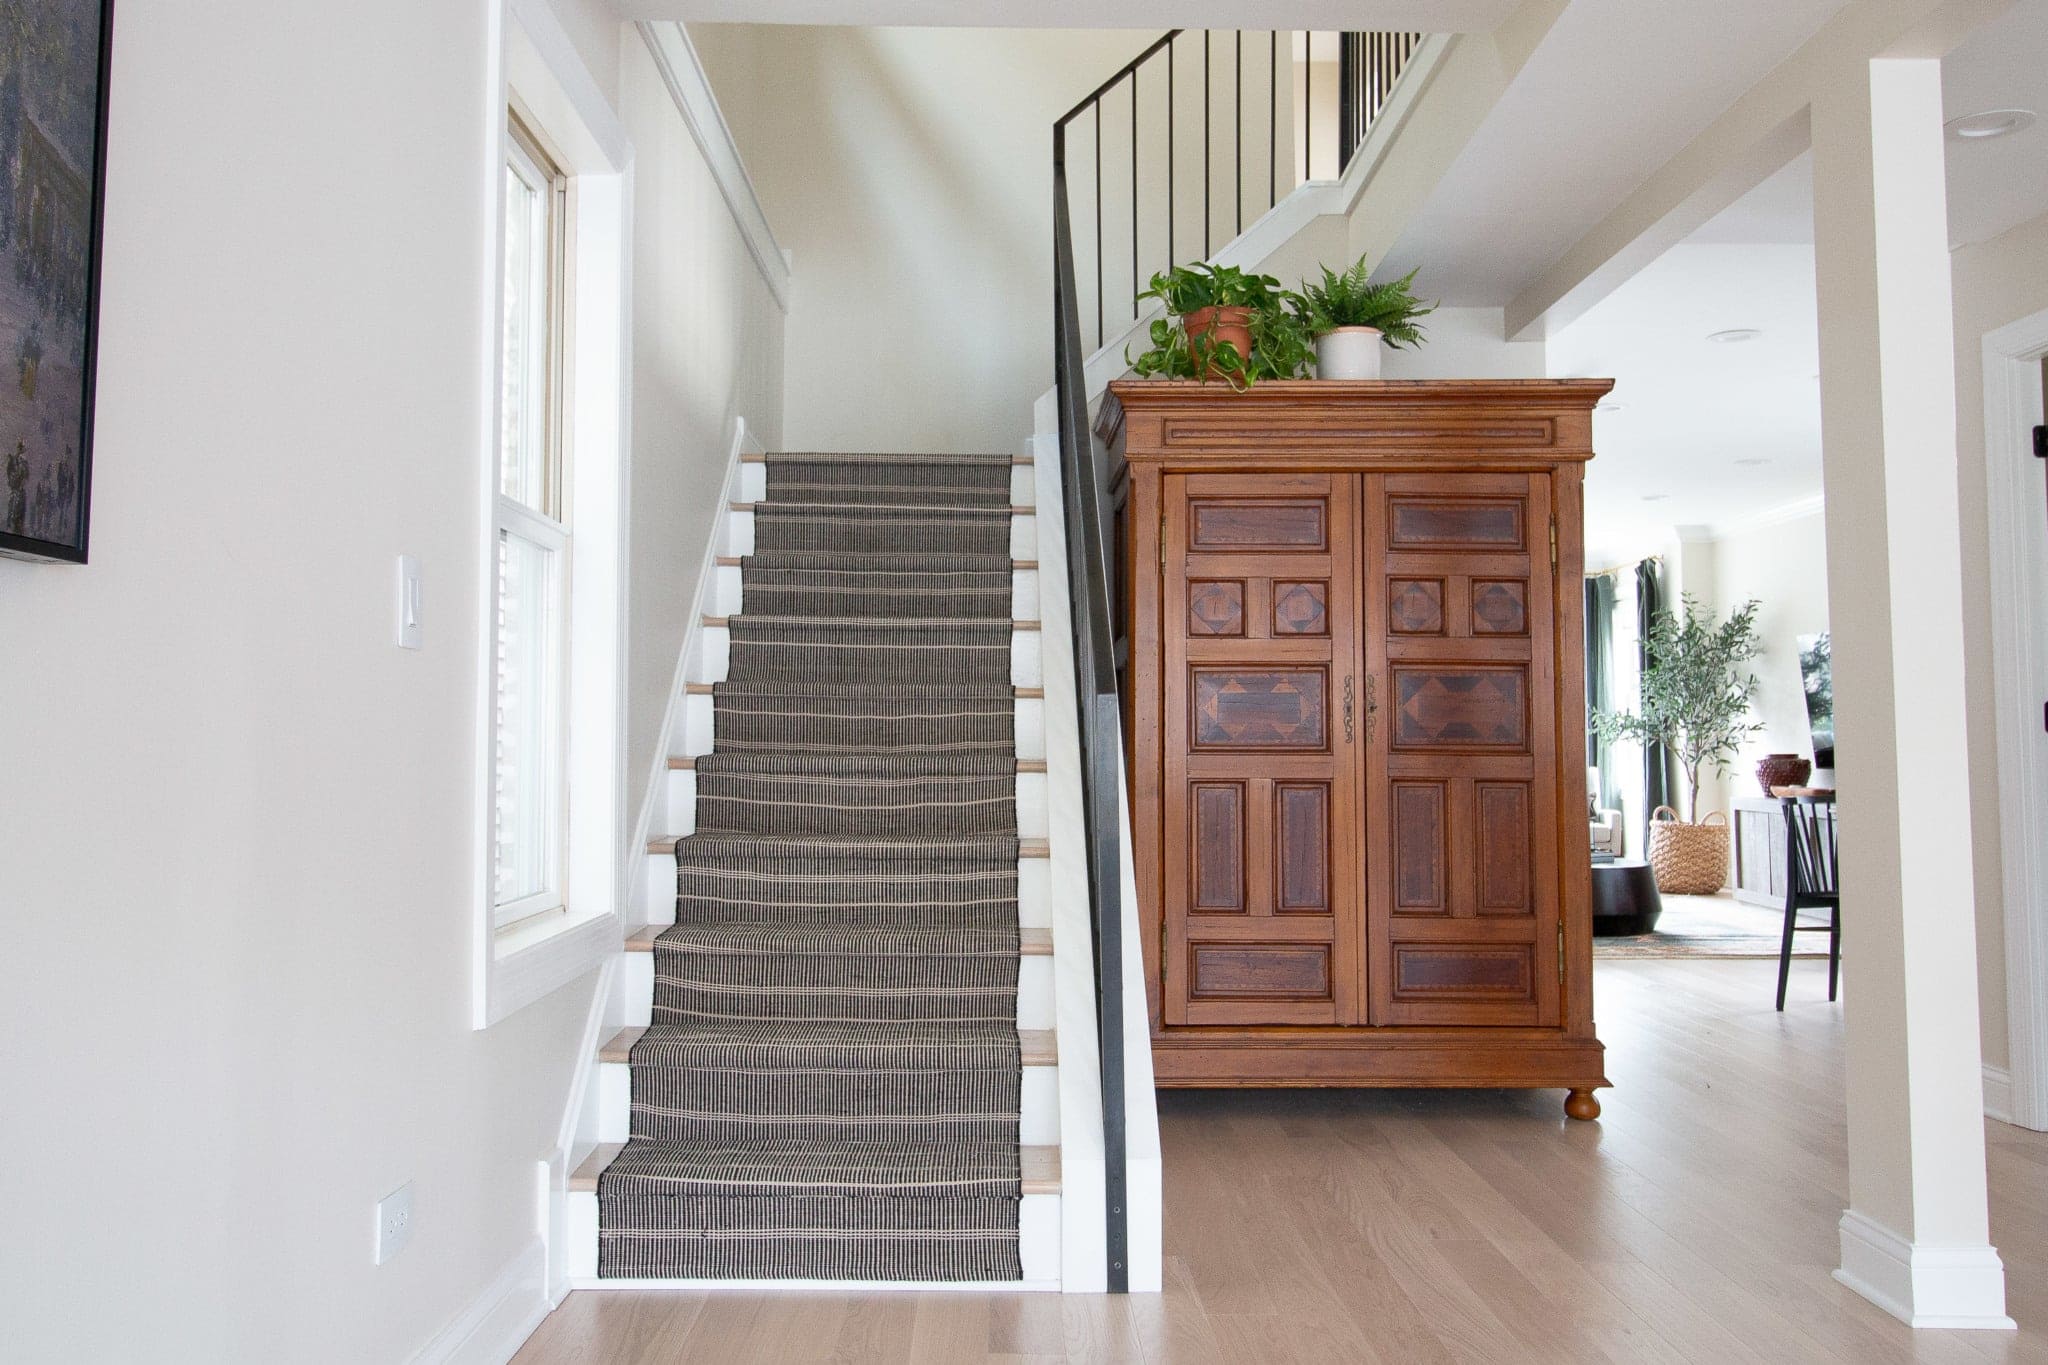 Tips to install a stair runner in your home